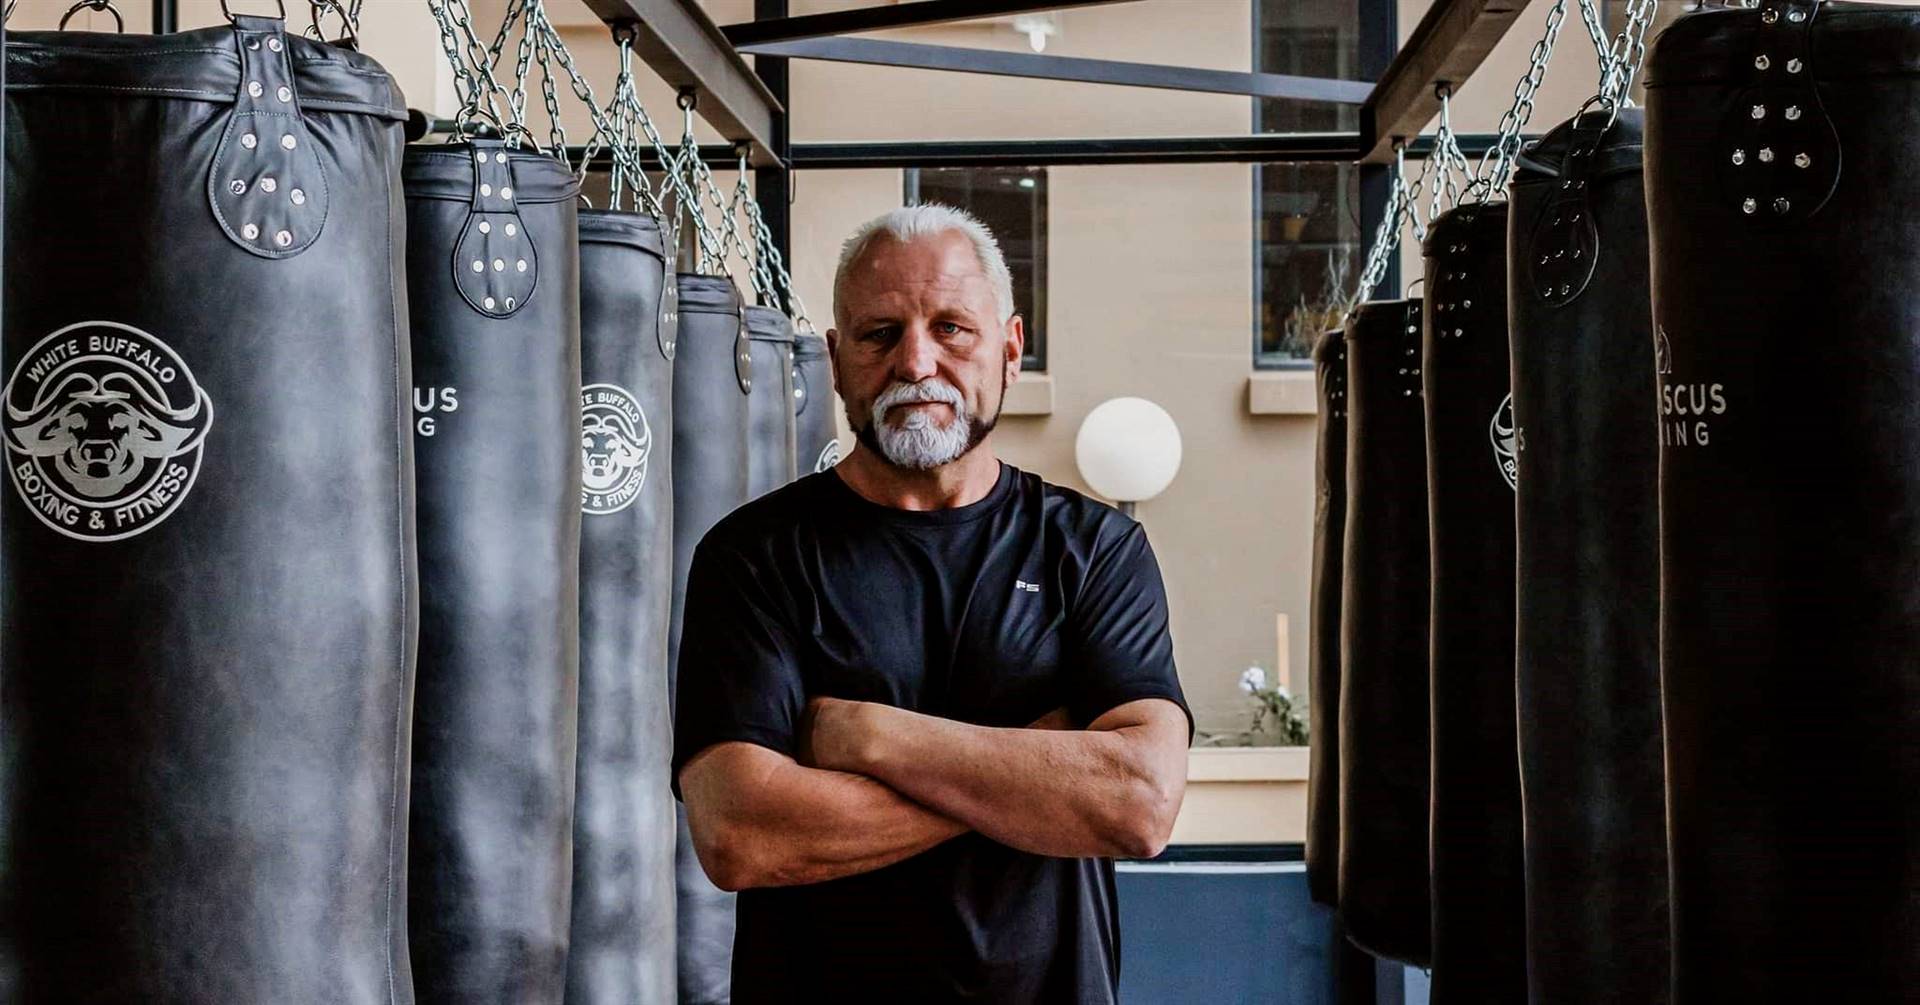 The former boxer Francois Botha had a close brush with death after being bitten by a spider. He is now recovering at home